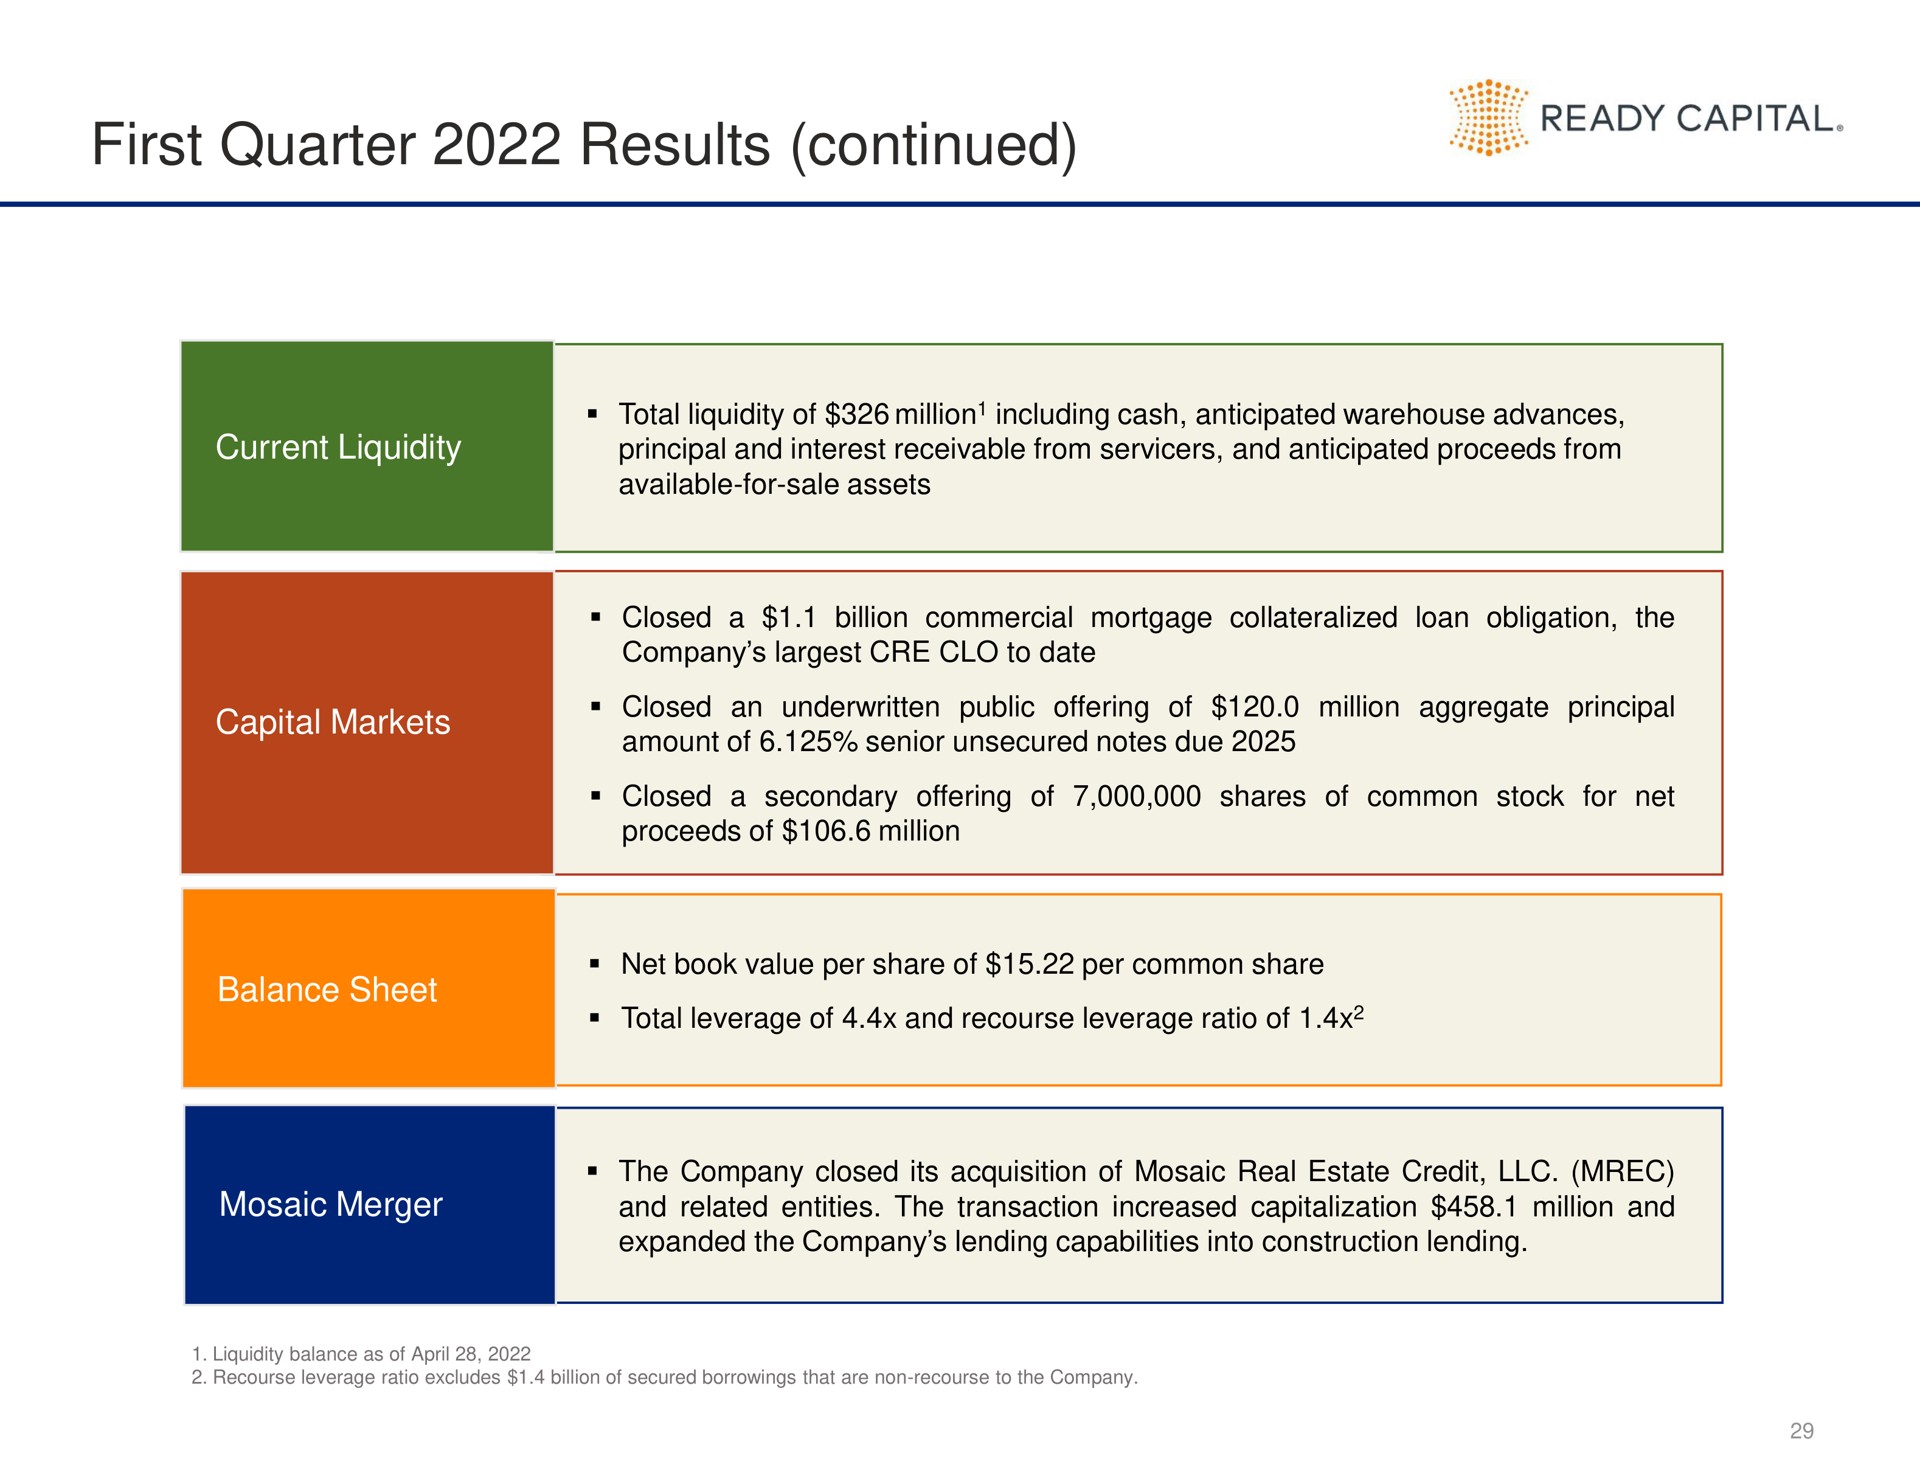 first quarter results continued ready capital | Ready Capital